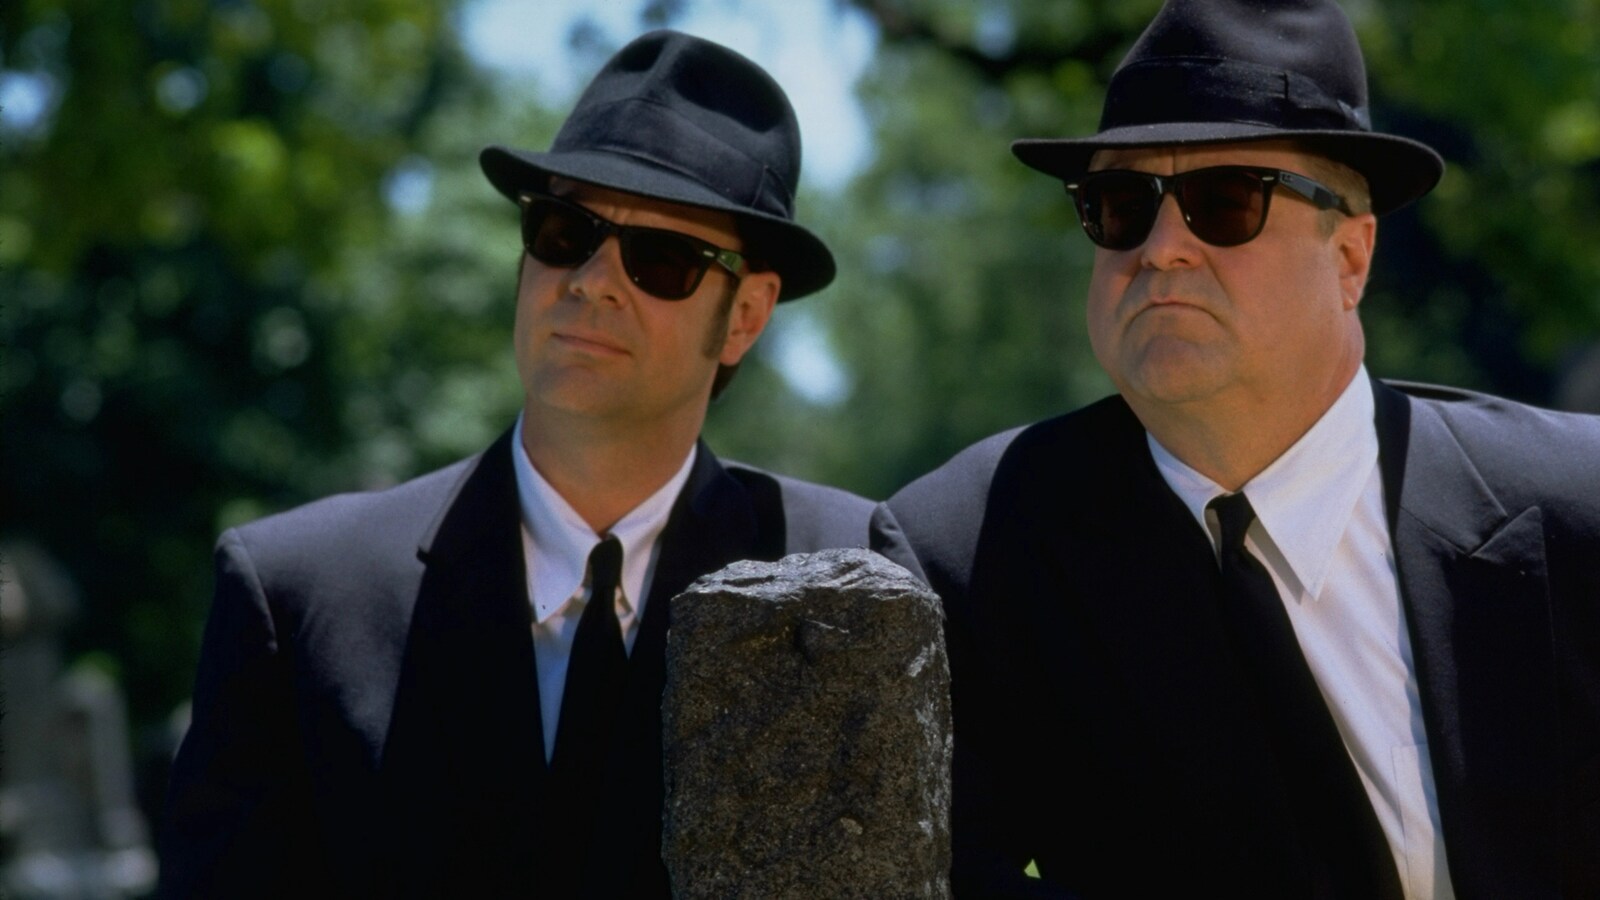 blues-brothers-2000-1998